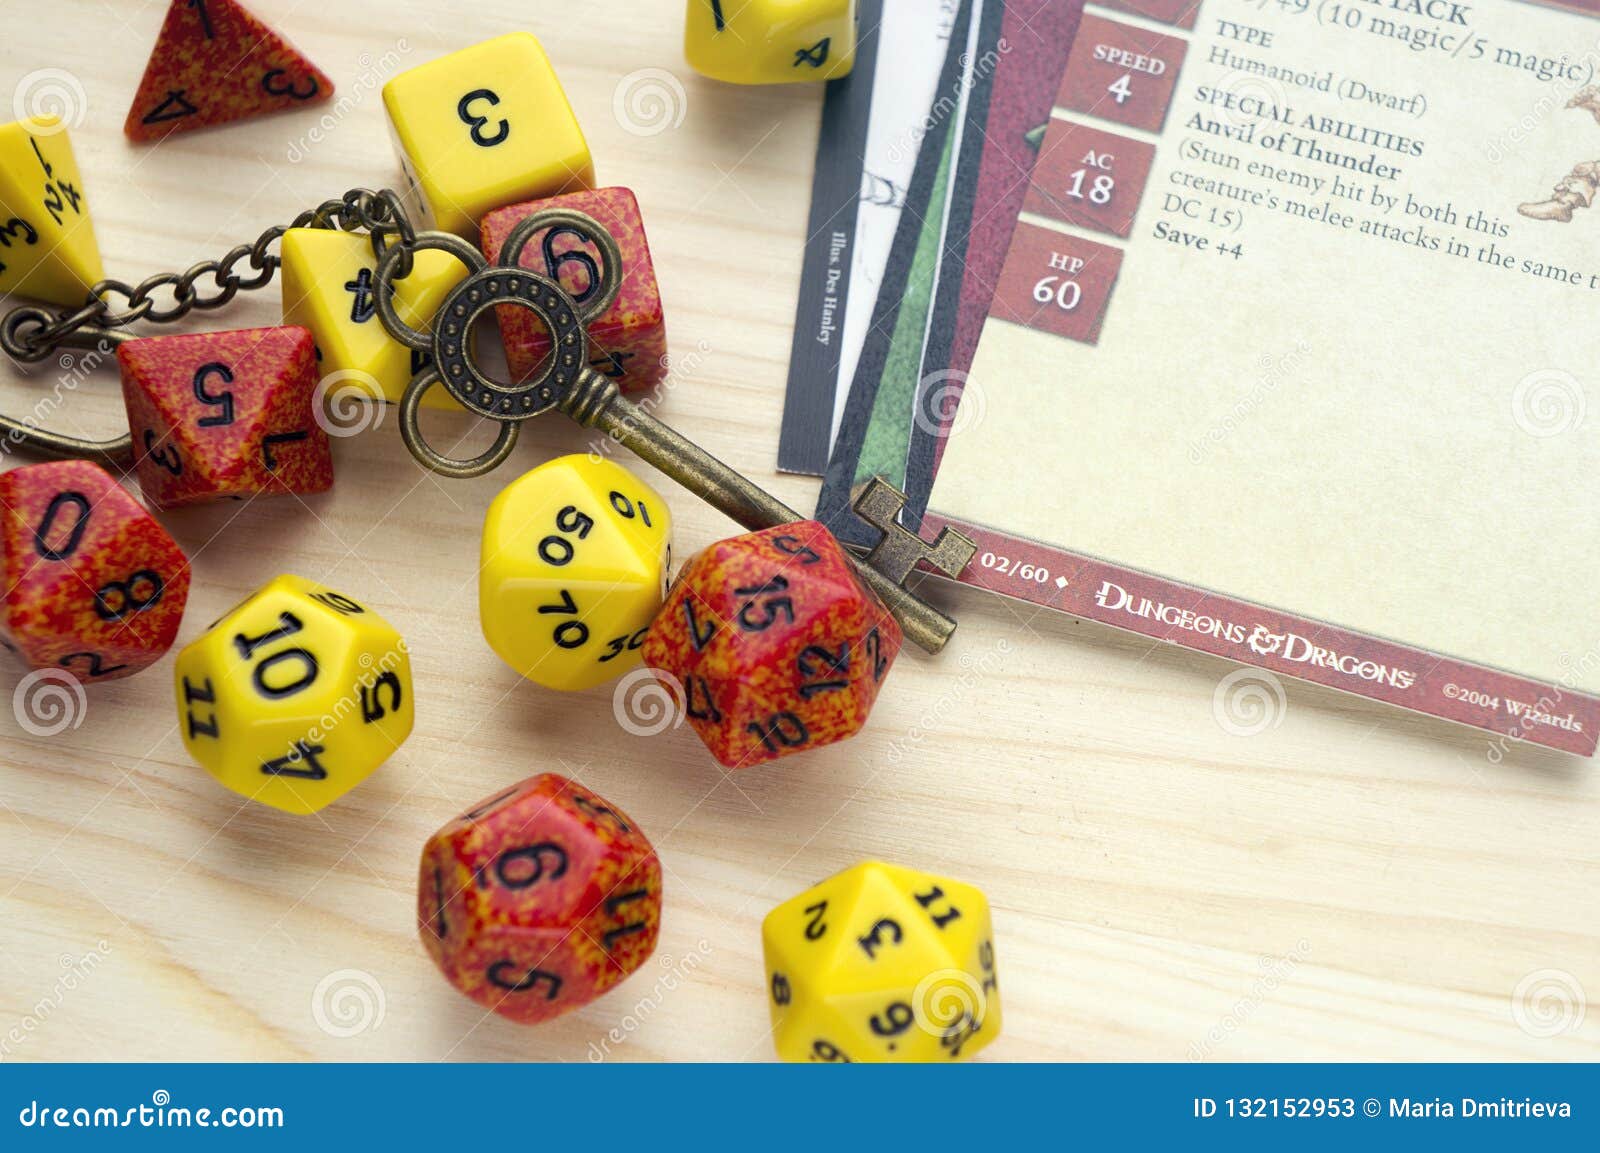 playing dungeons and dragons, a role play game. dices and cards lying on wooden surface. deco